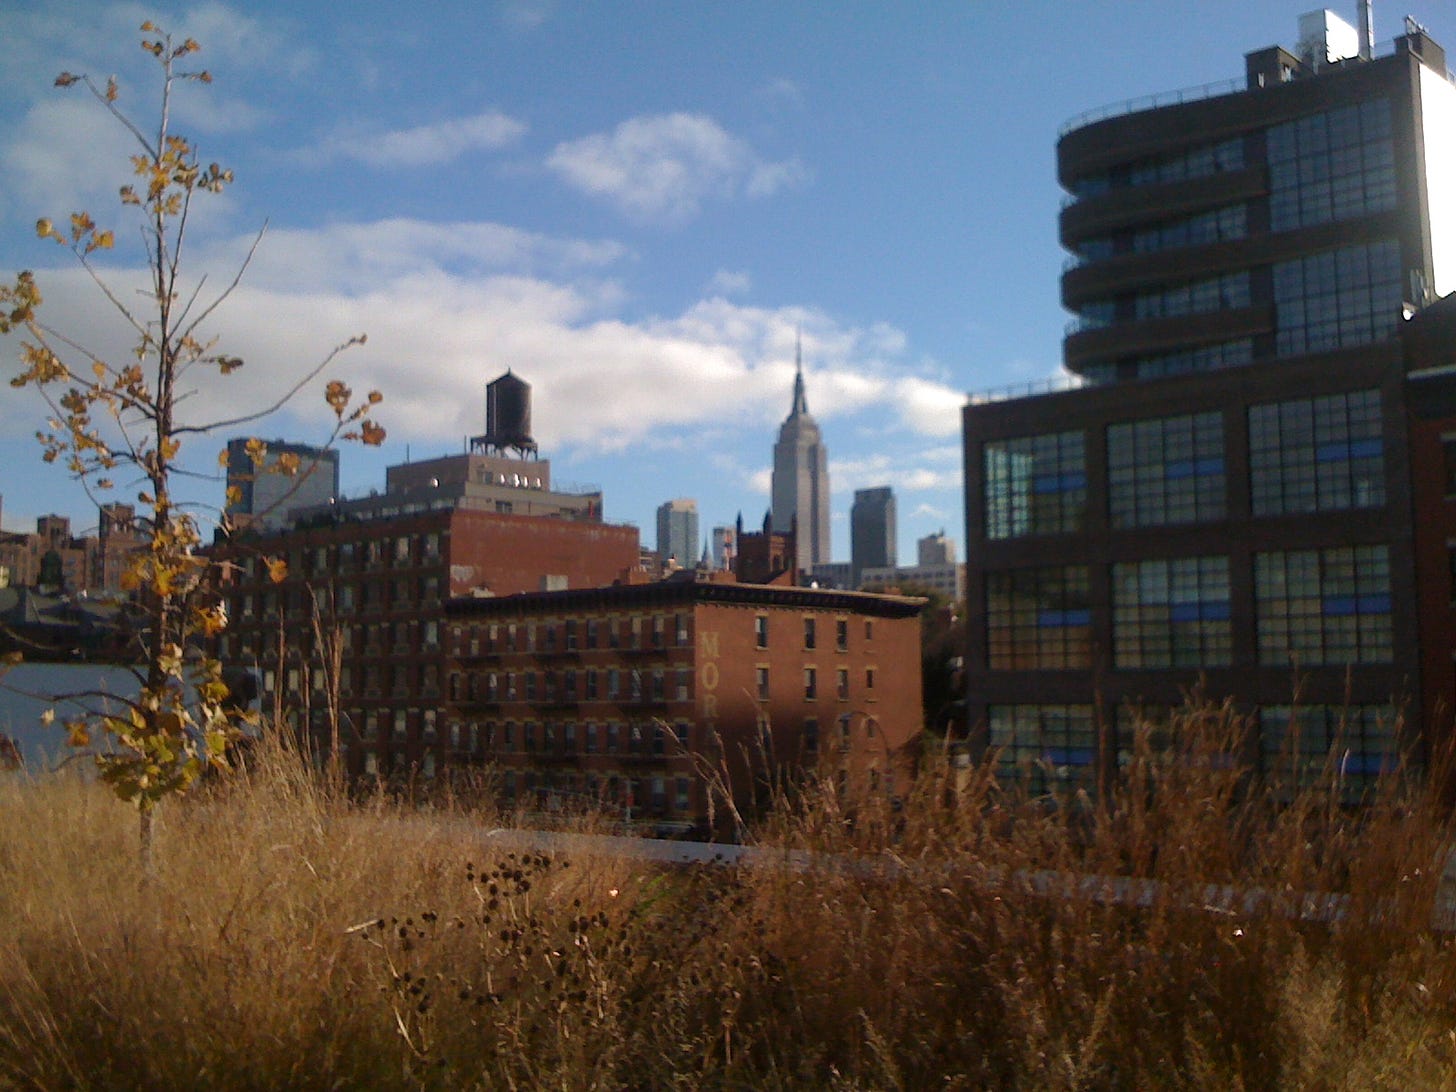 Grassland on High Line New York, a rooftop water tower and Empire State Building